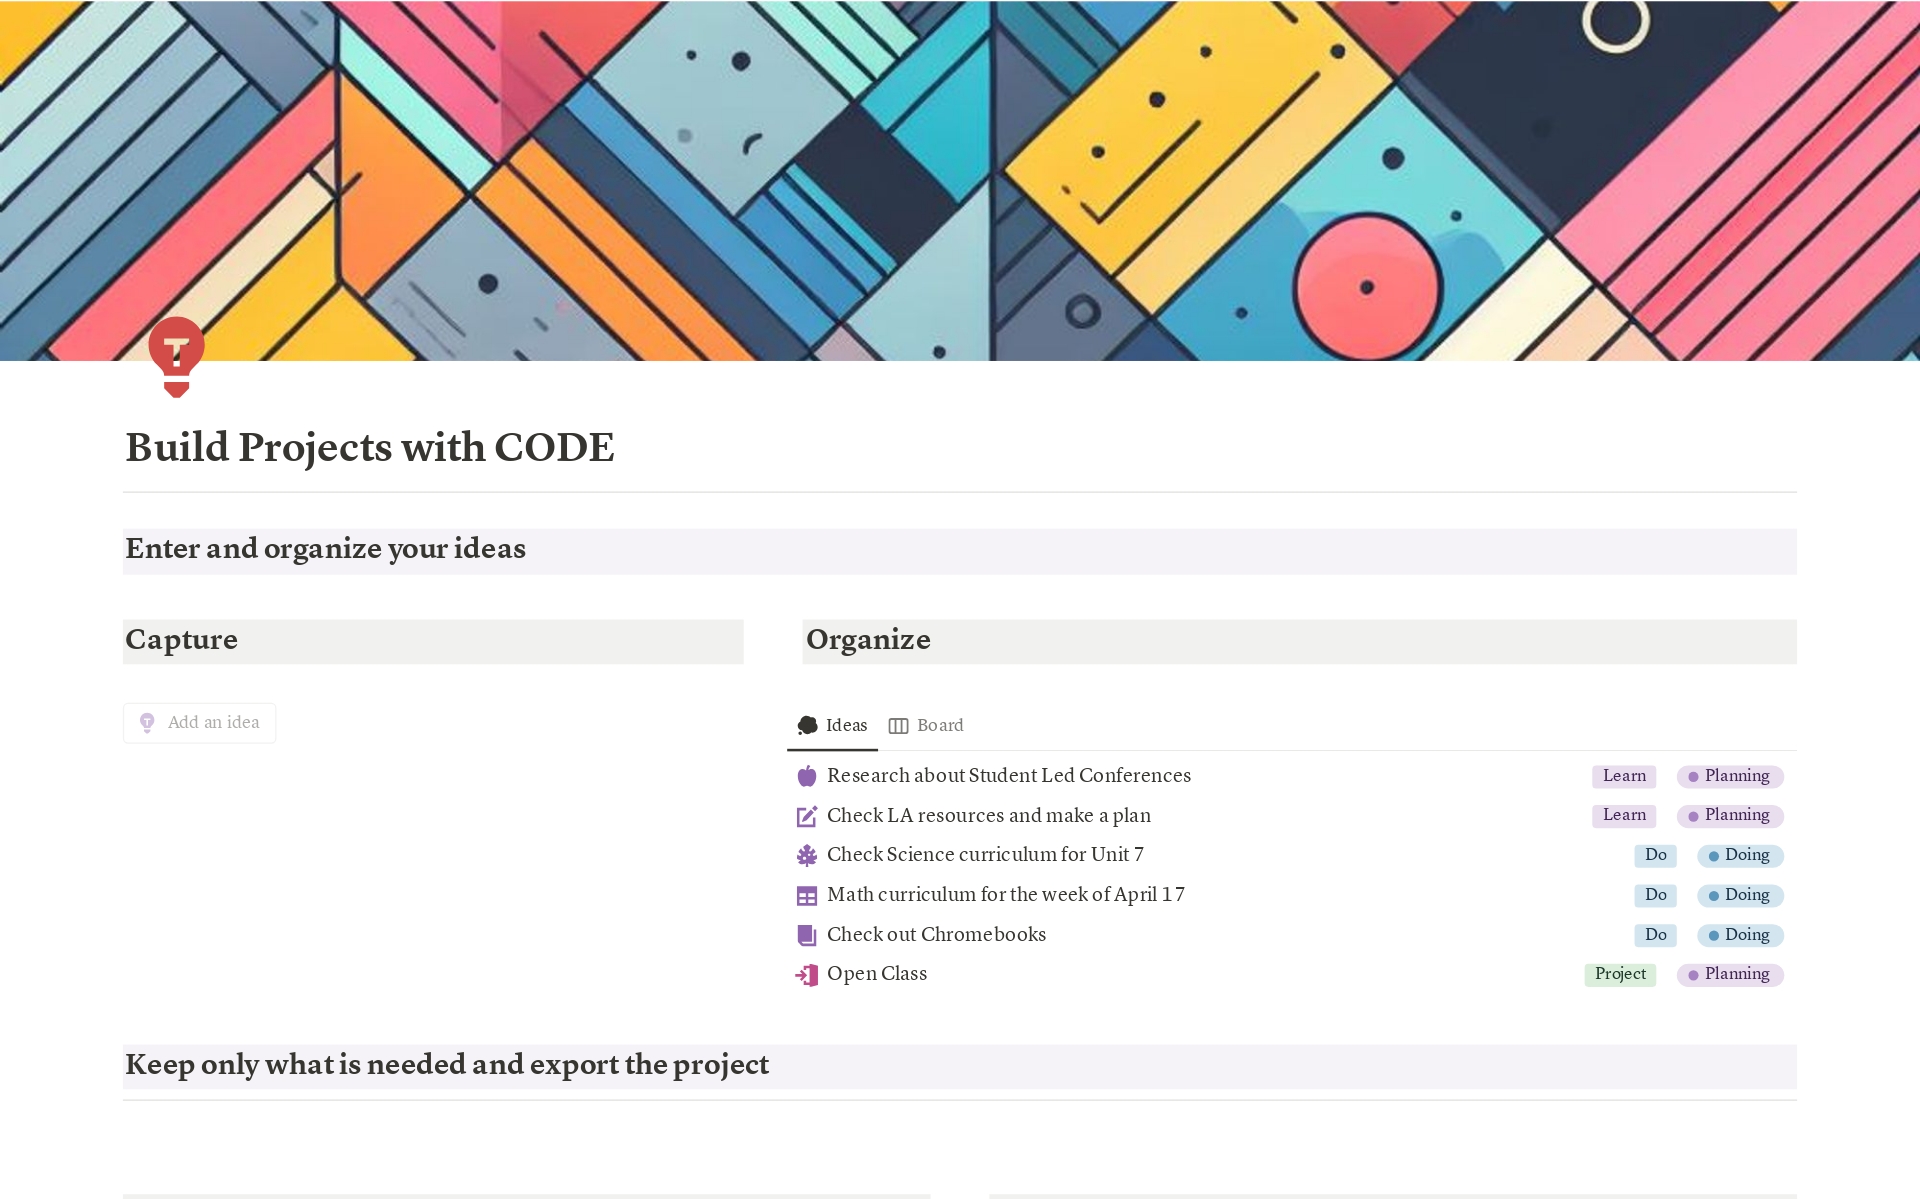 This tool will help you build your projects using CODE acronym (capture, organize, distill, export). 